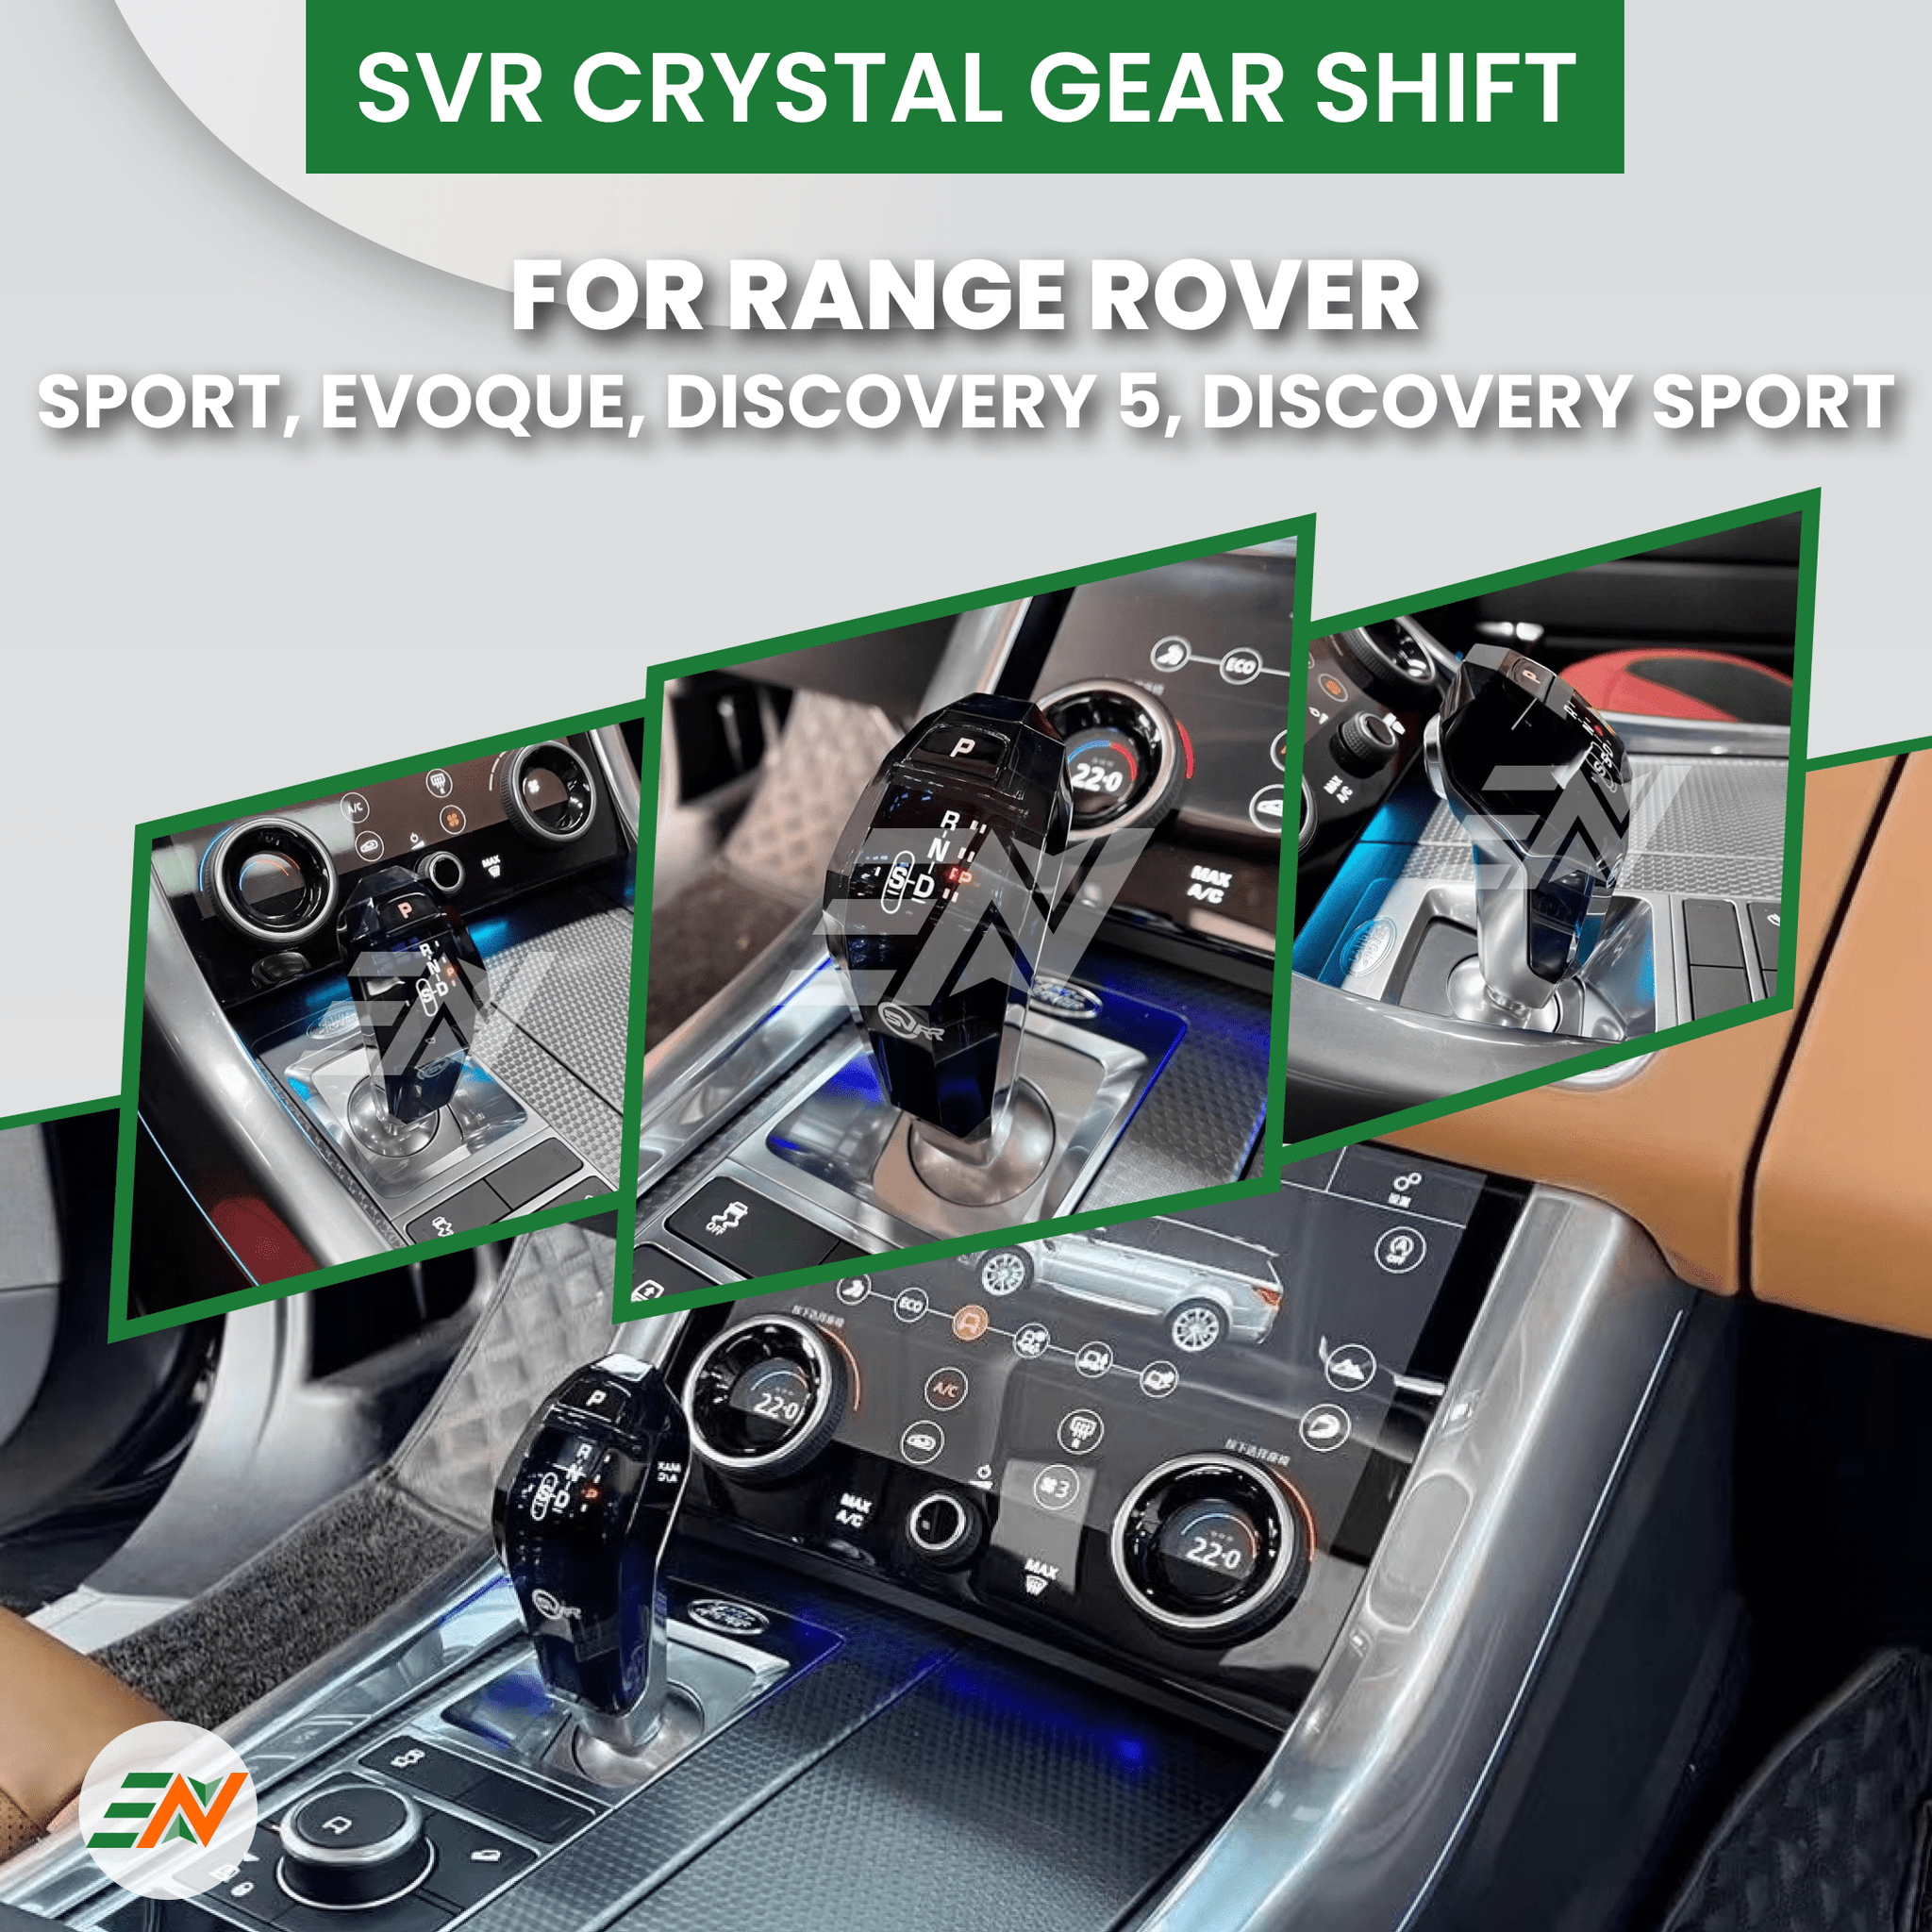 Euronavigate SVR crystal gear shift for Range Rover Sport, Evoque, Discovery 5, Discovery Sport